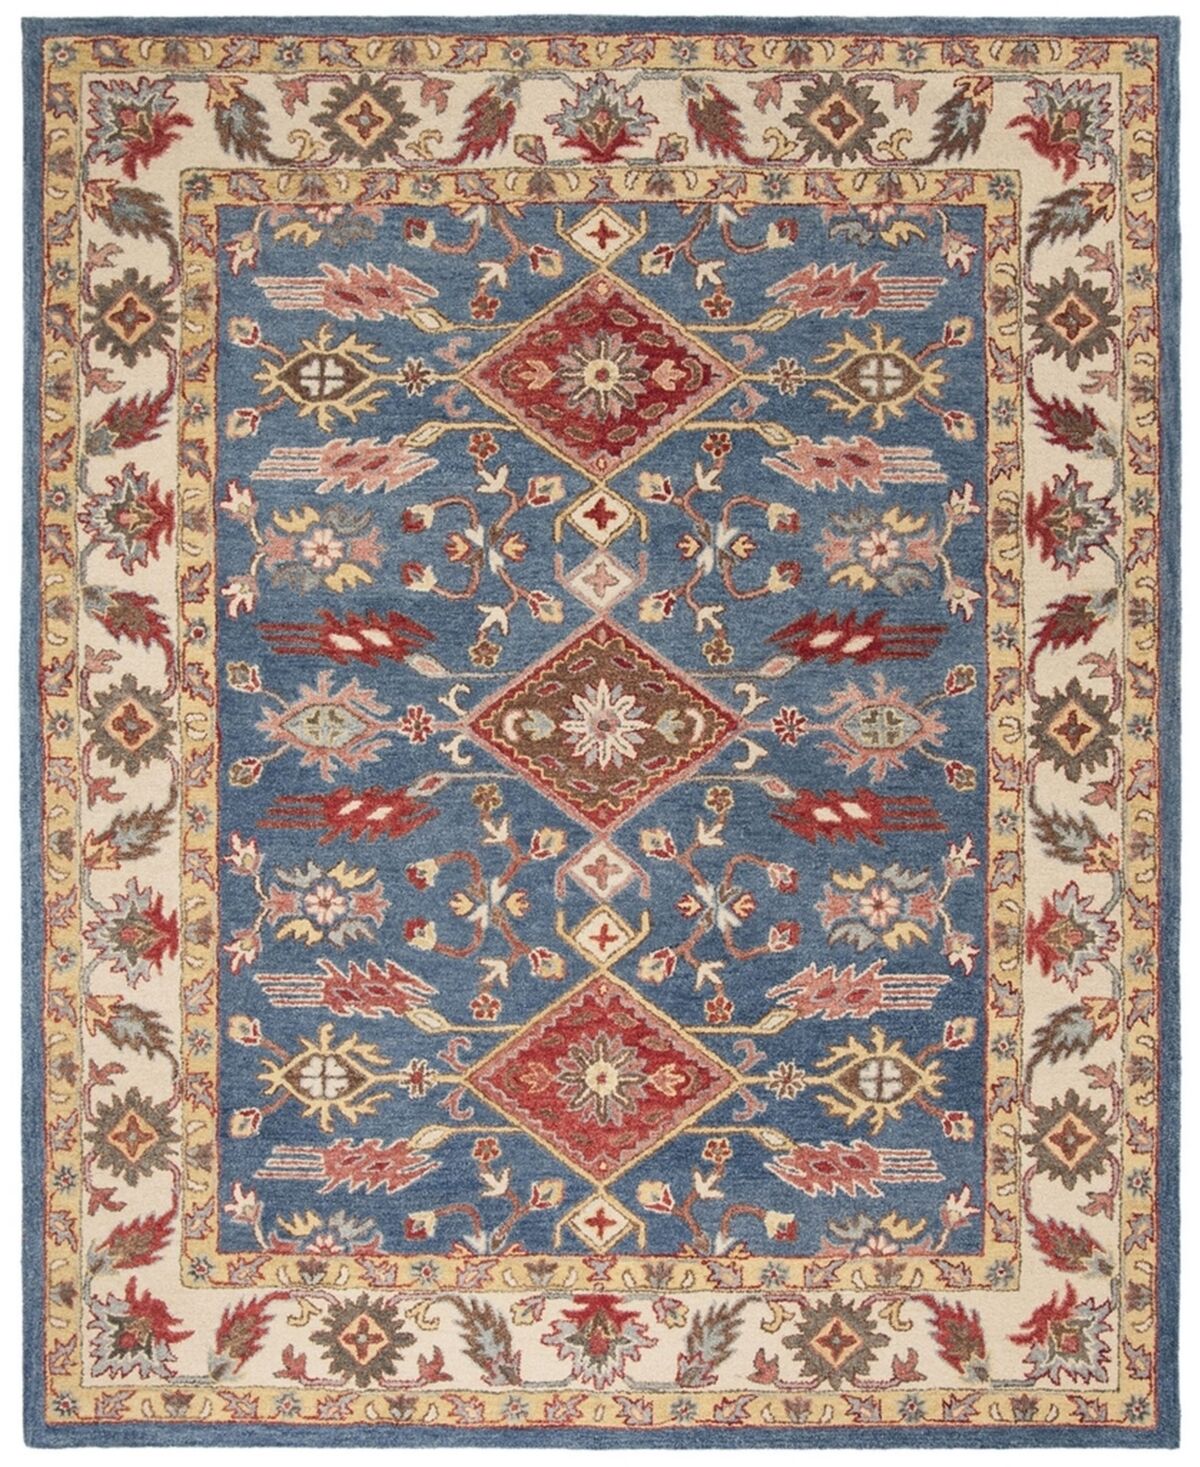 Safavieh Antiquity At506 Blue and Red 8' x 10' Area Rug - Blue